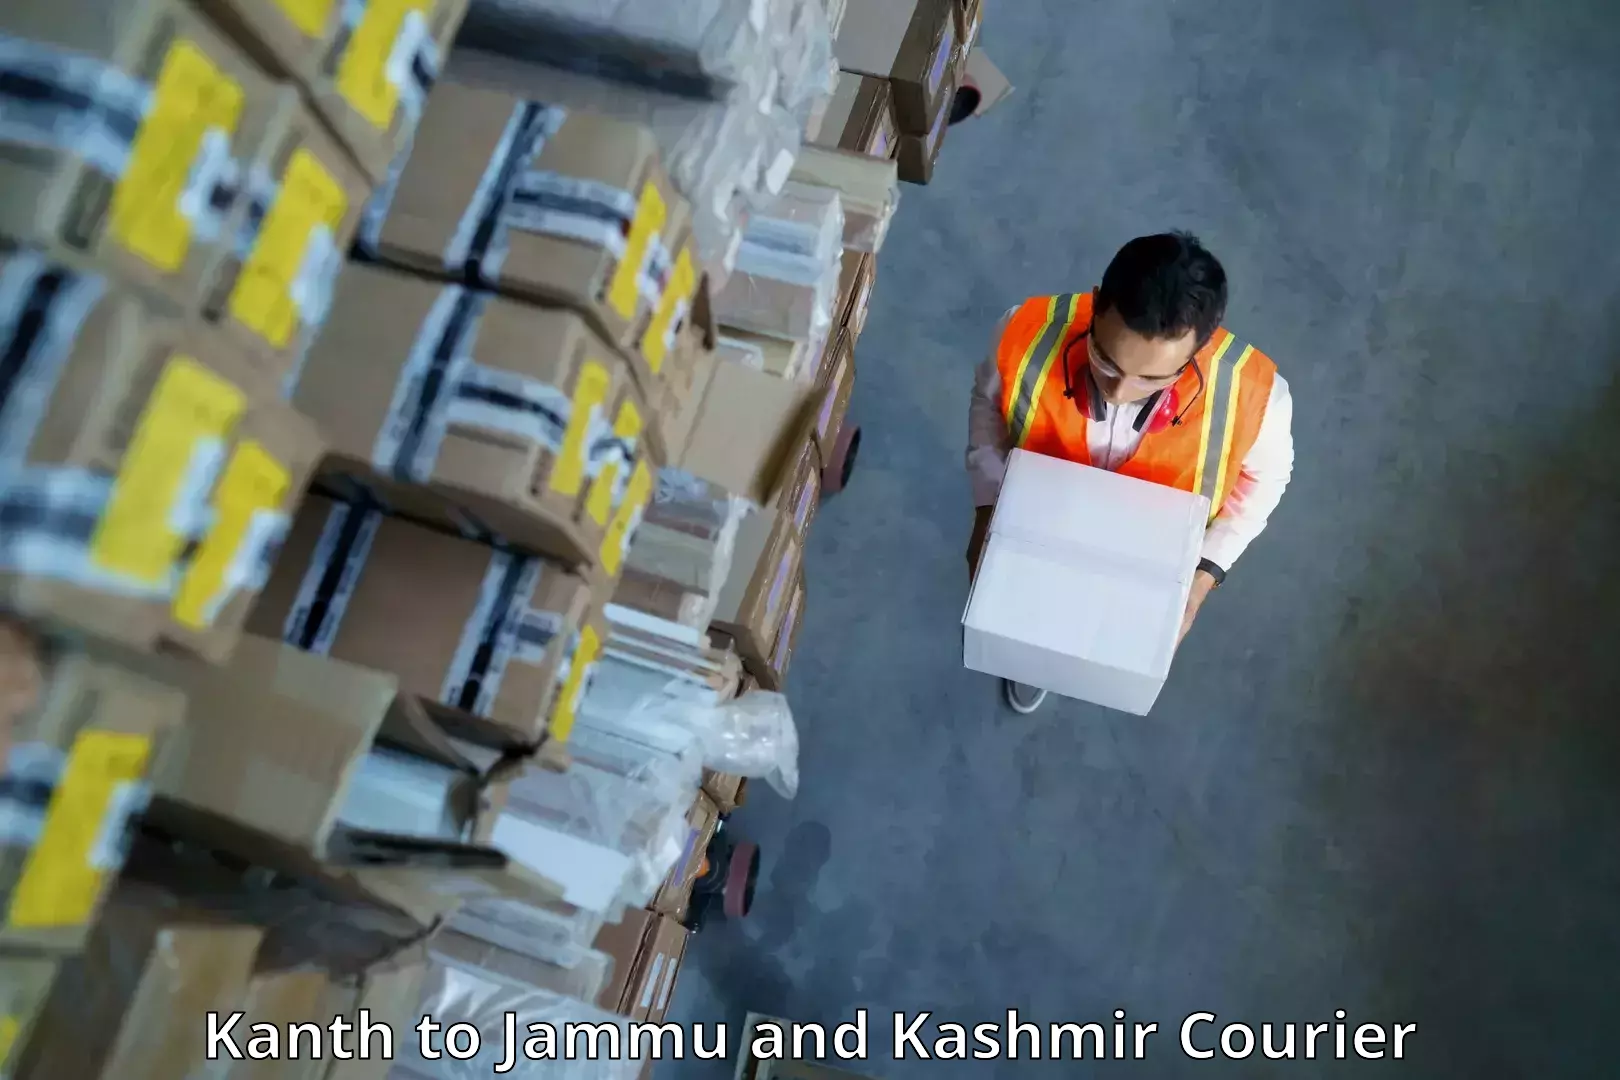 24-hour courier service in Kanth to Jammu and Kashmir